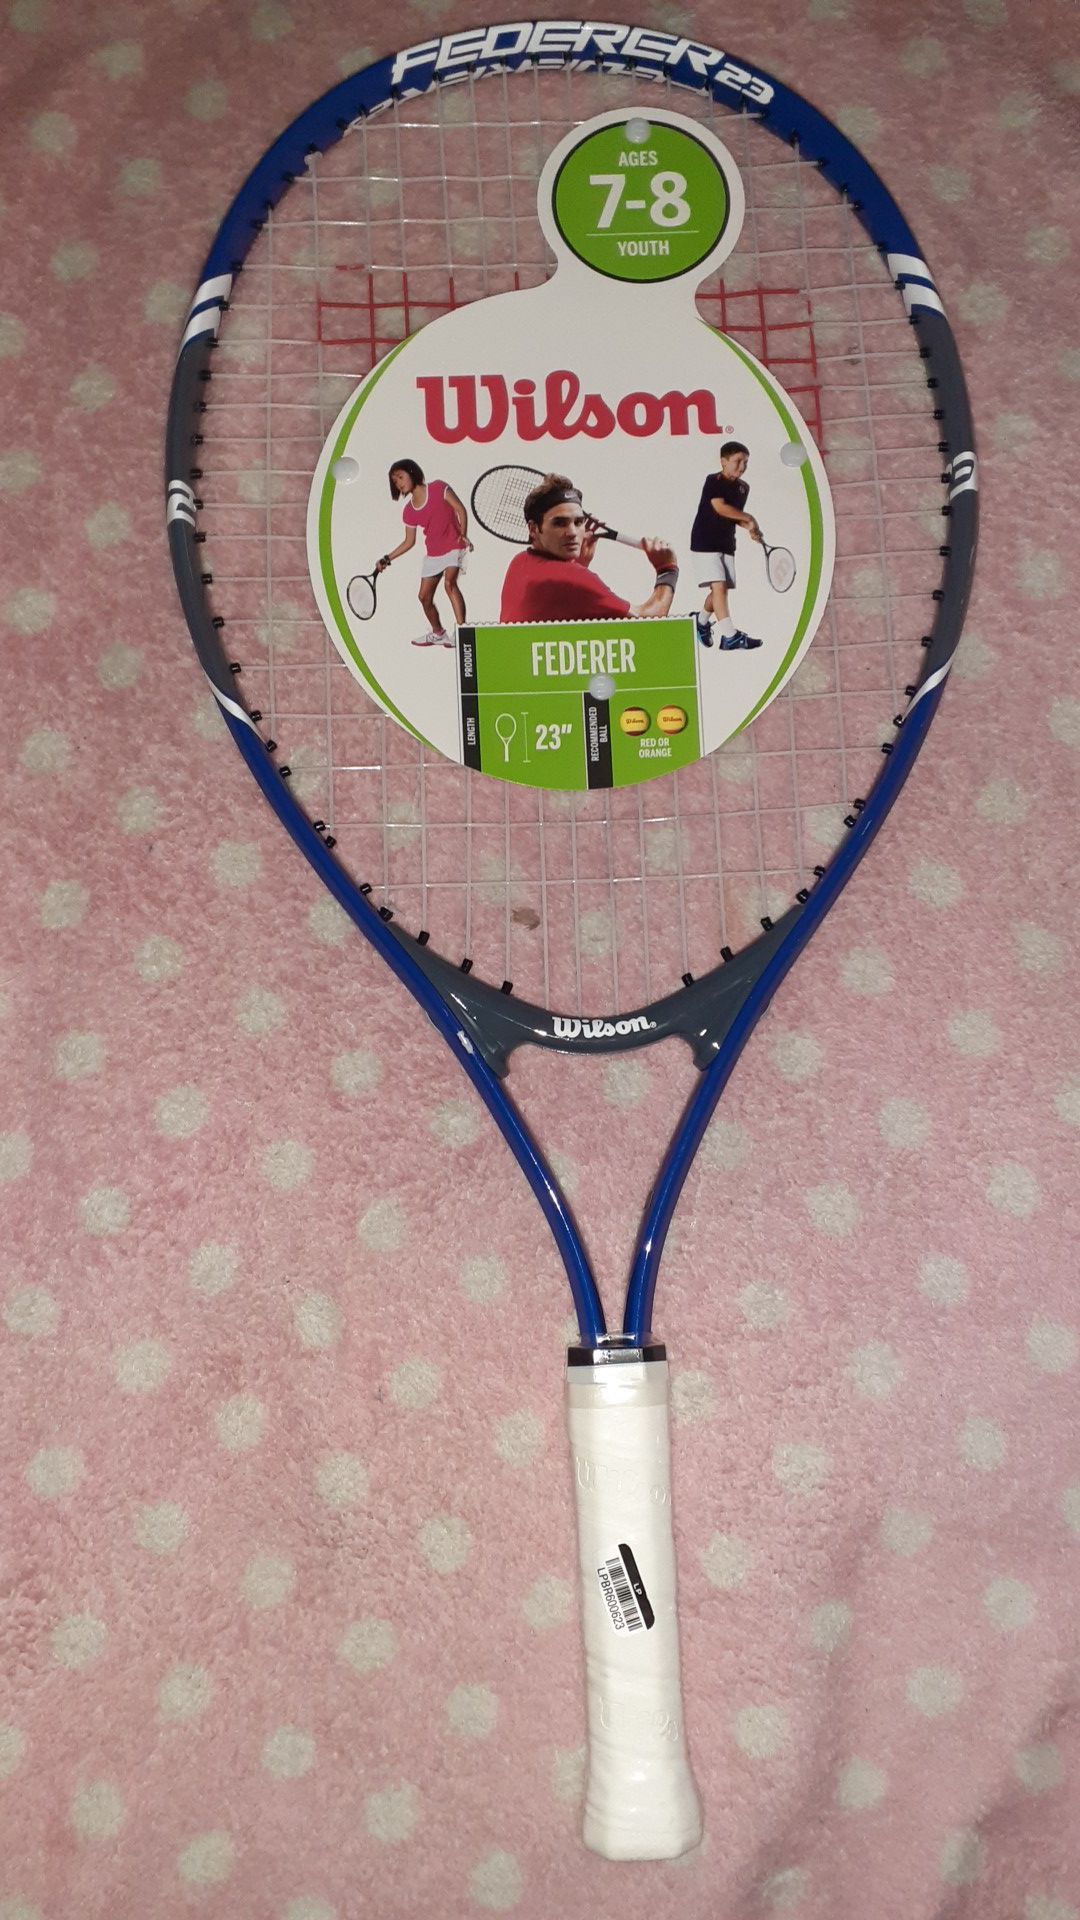 Wilson Federer tennis racket 23 in length Wilson ages 7 to 8 youth tennis racket